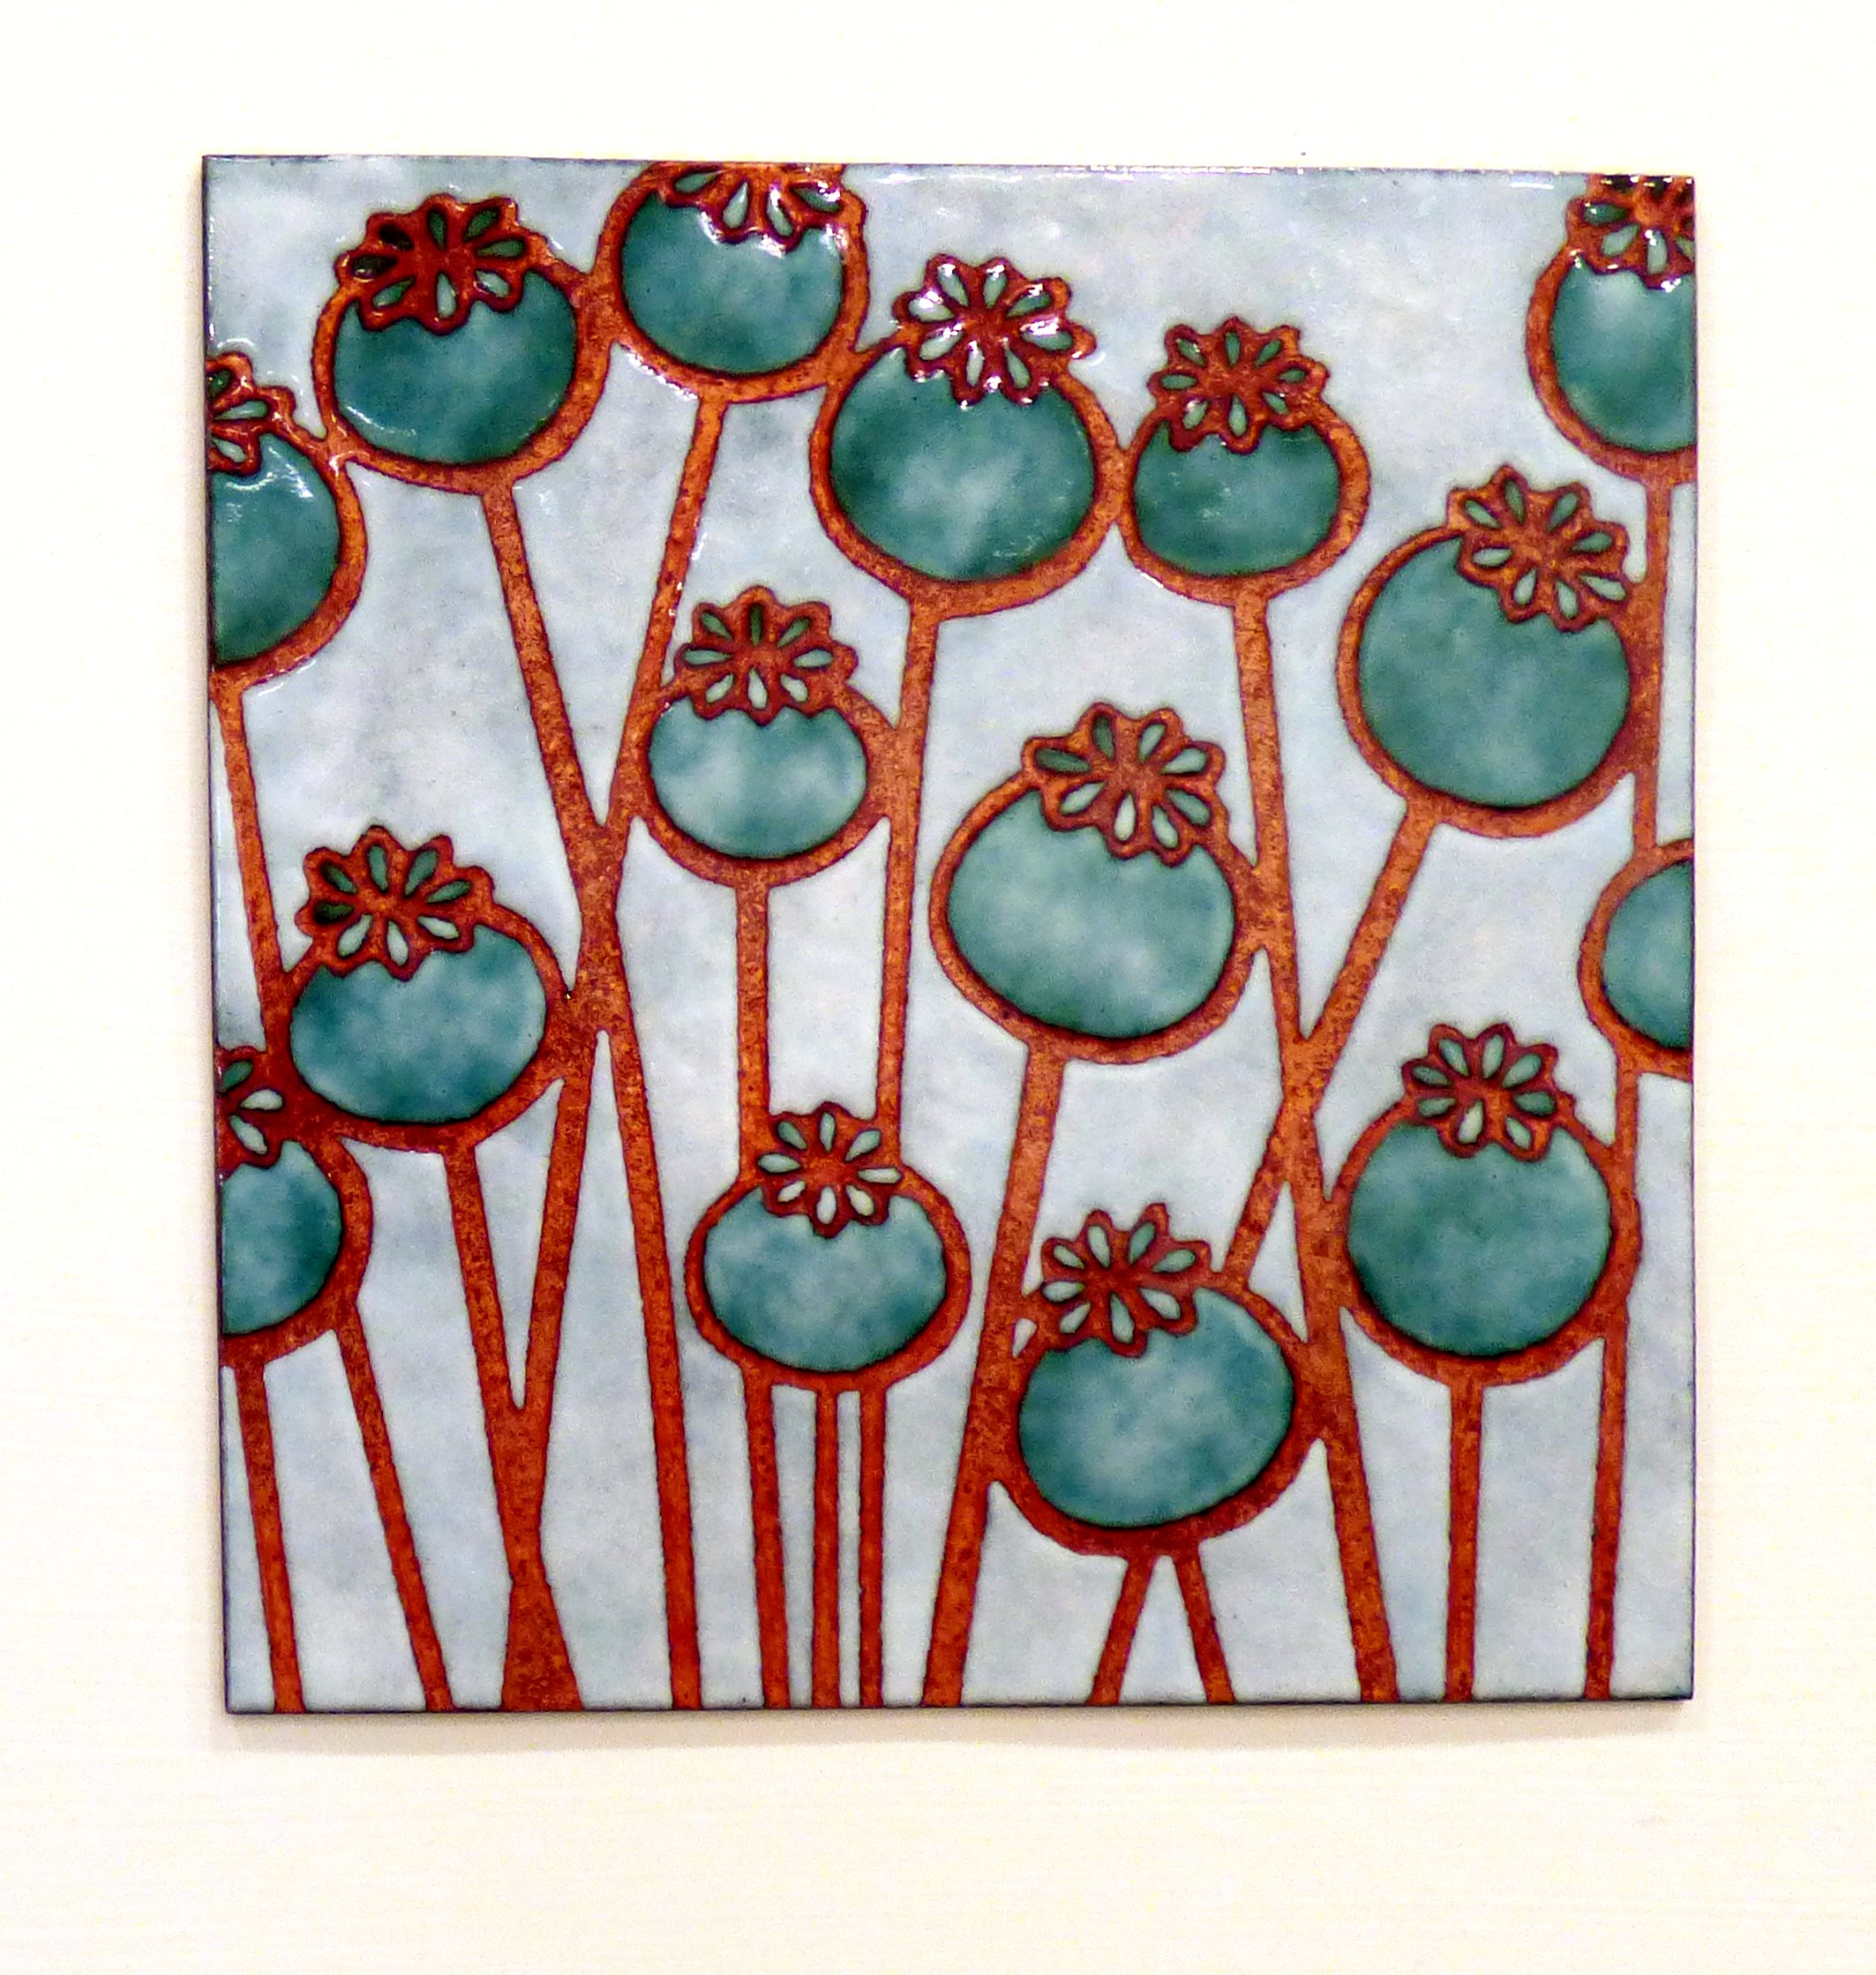 ENAMELLED PANEL 4 by Janine Partington, CRAFTED exhibitioin, Kirkby Gallery, 2016